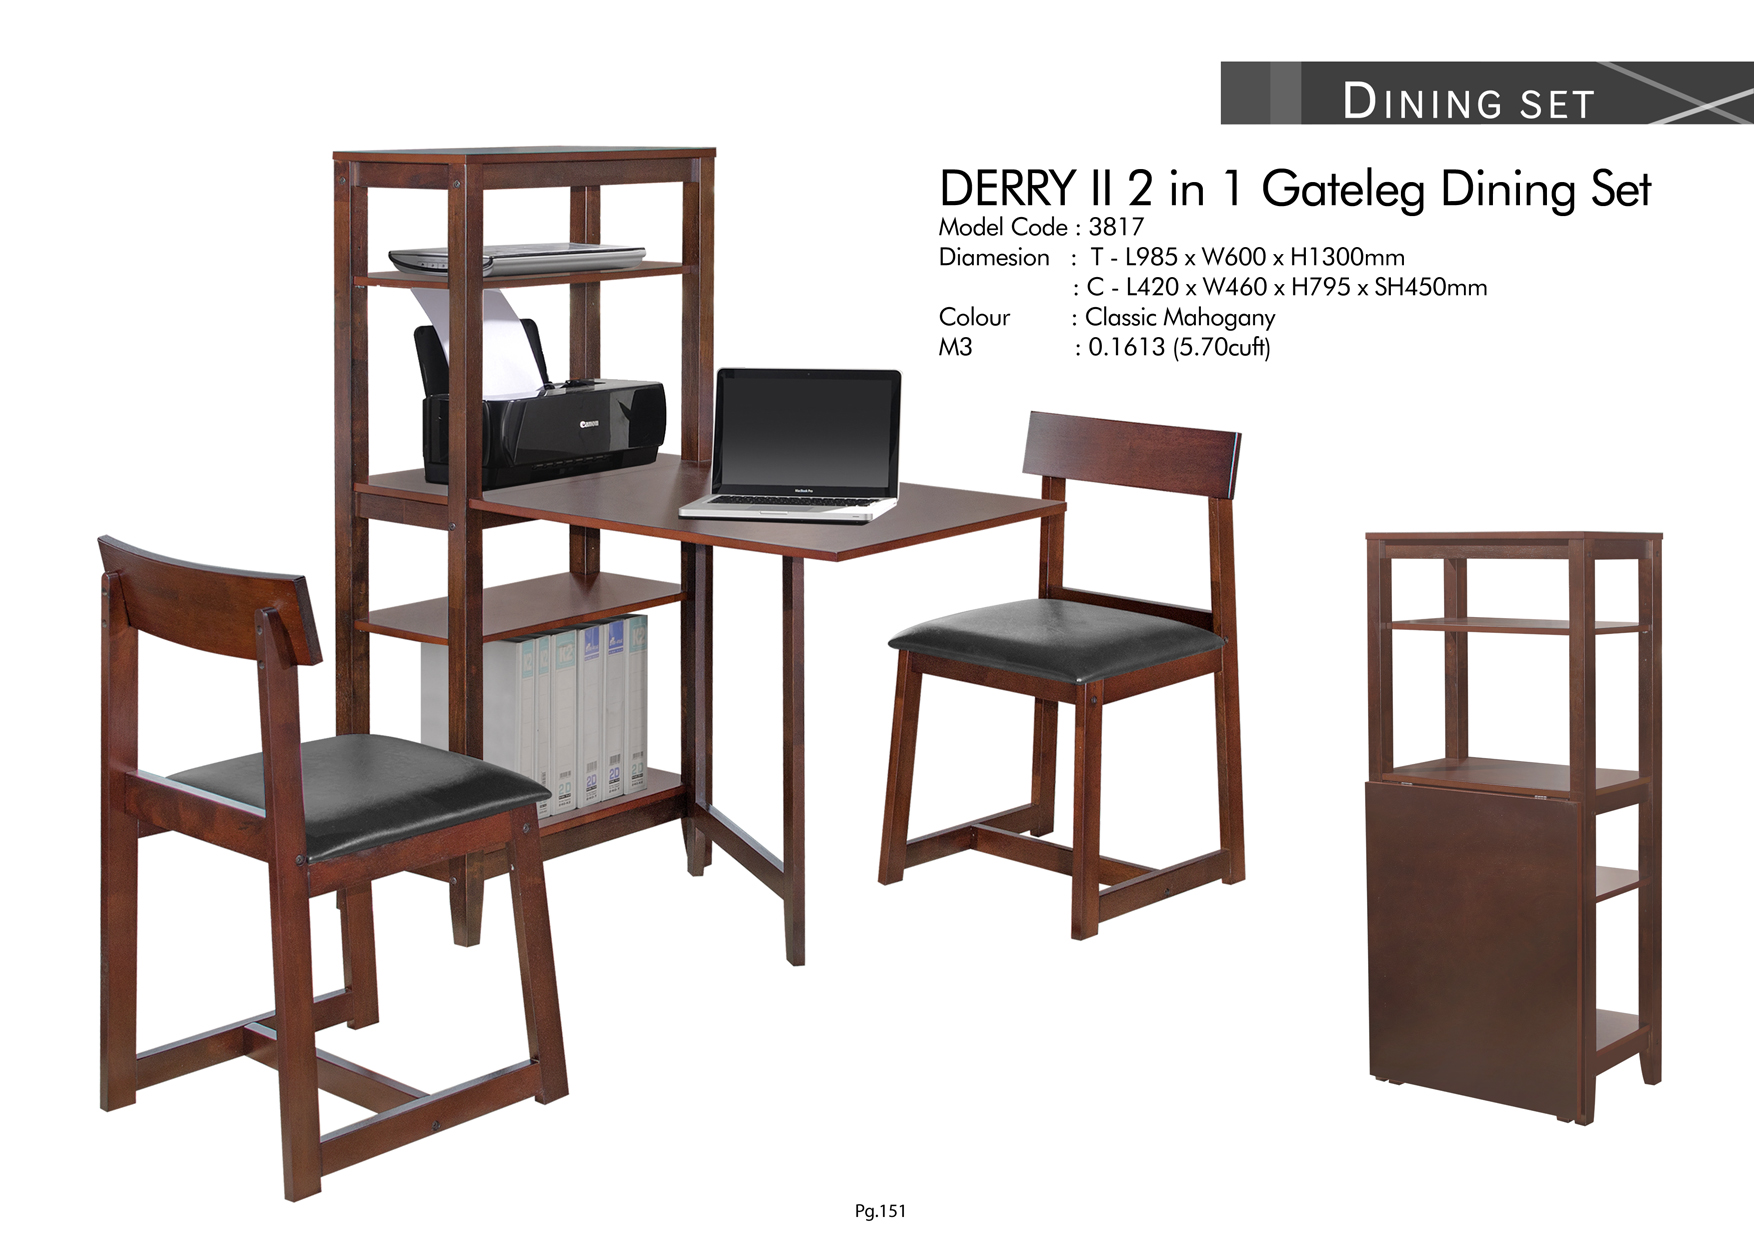 Product: PG151. DERRY II 2 IN 1 GETELEG DINING SET